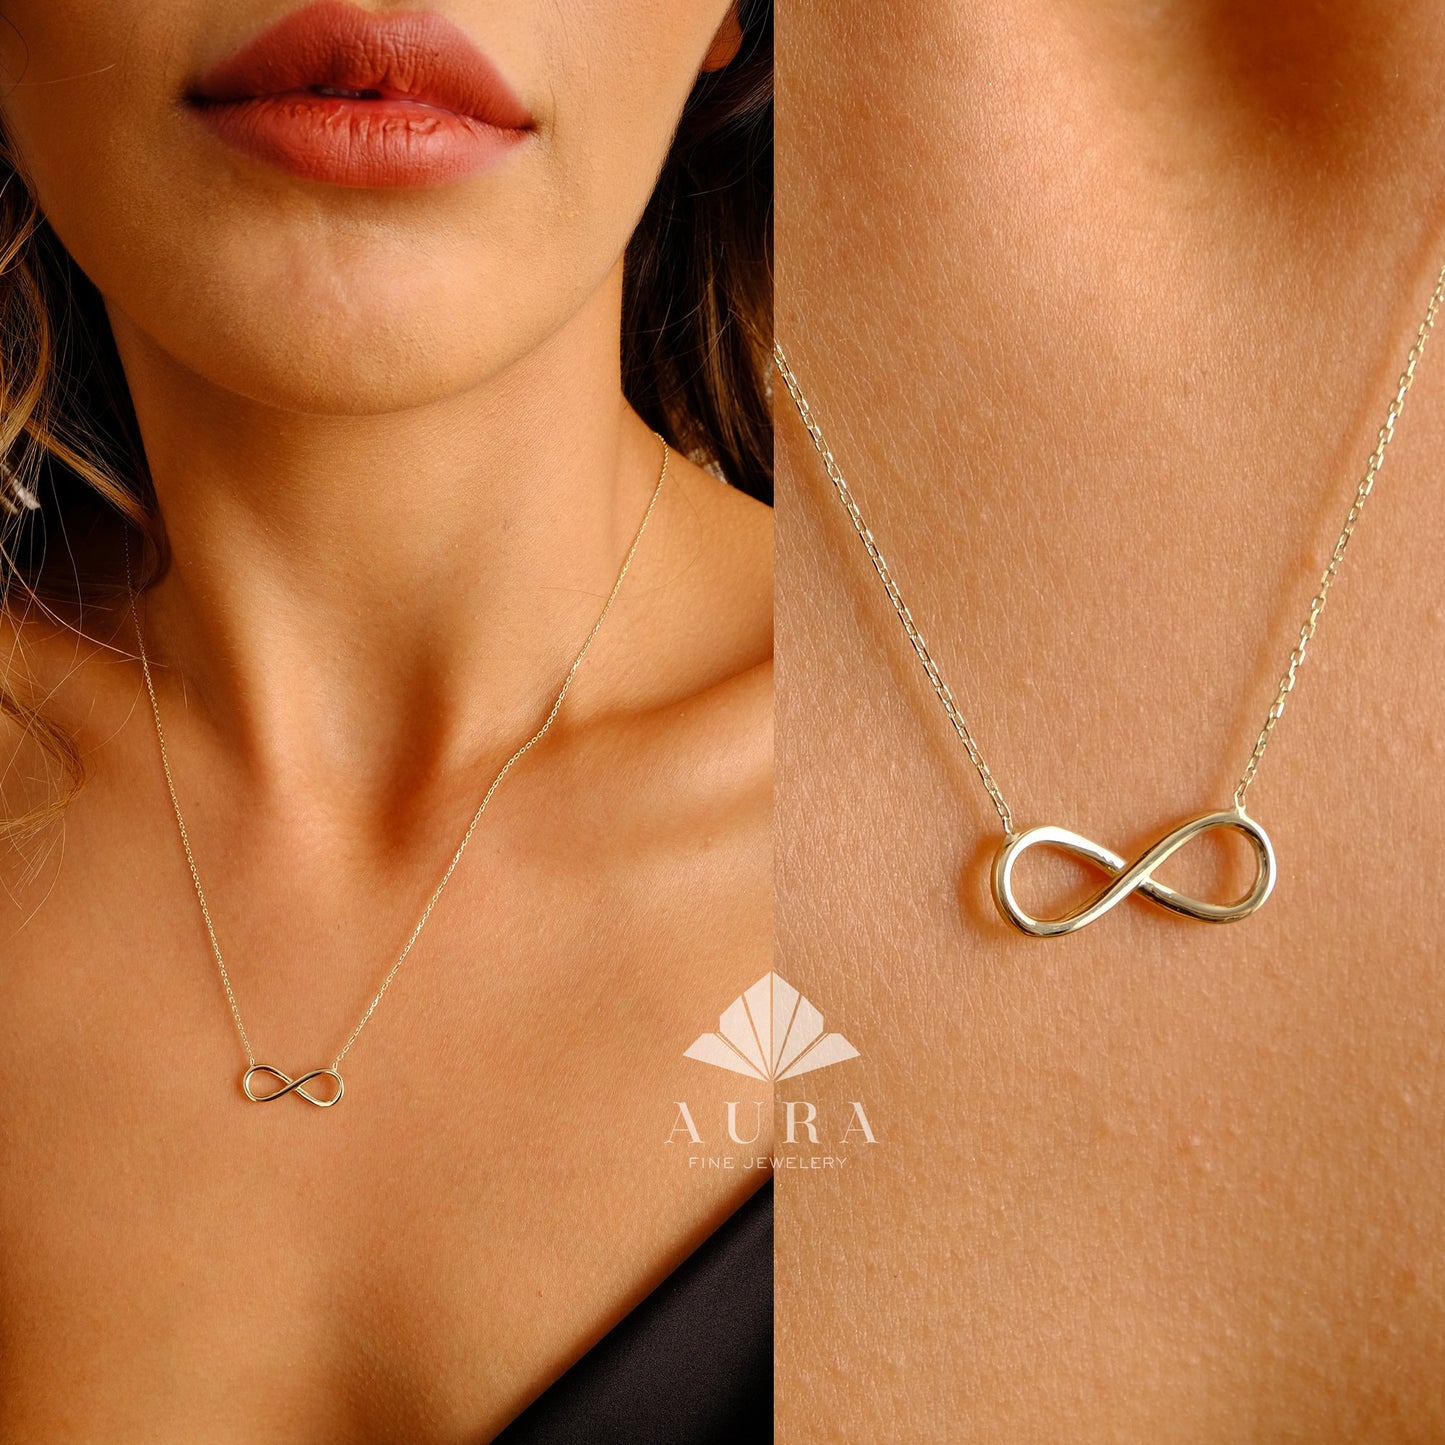 14K Gold Infinity Necklace, Infinity Pendant, Eternity Necklace, Infinite Love Necklace, Valentines Day Gift, Forever Friendship Necklace